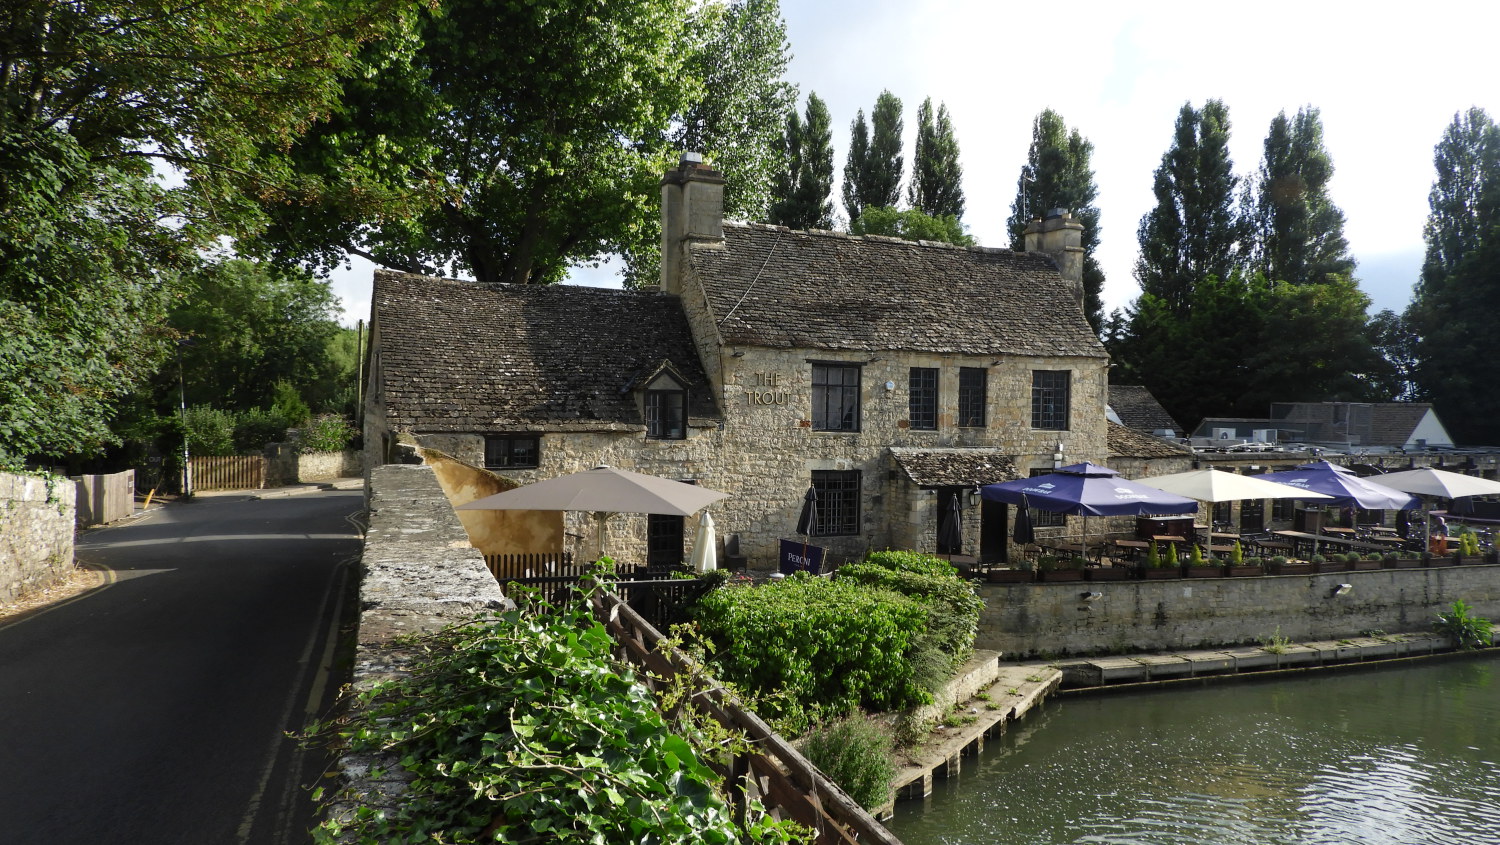 Trout Inn, favourite of Inspector Morse